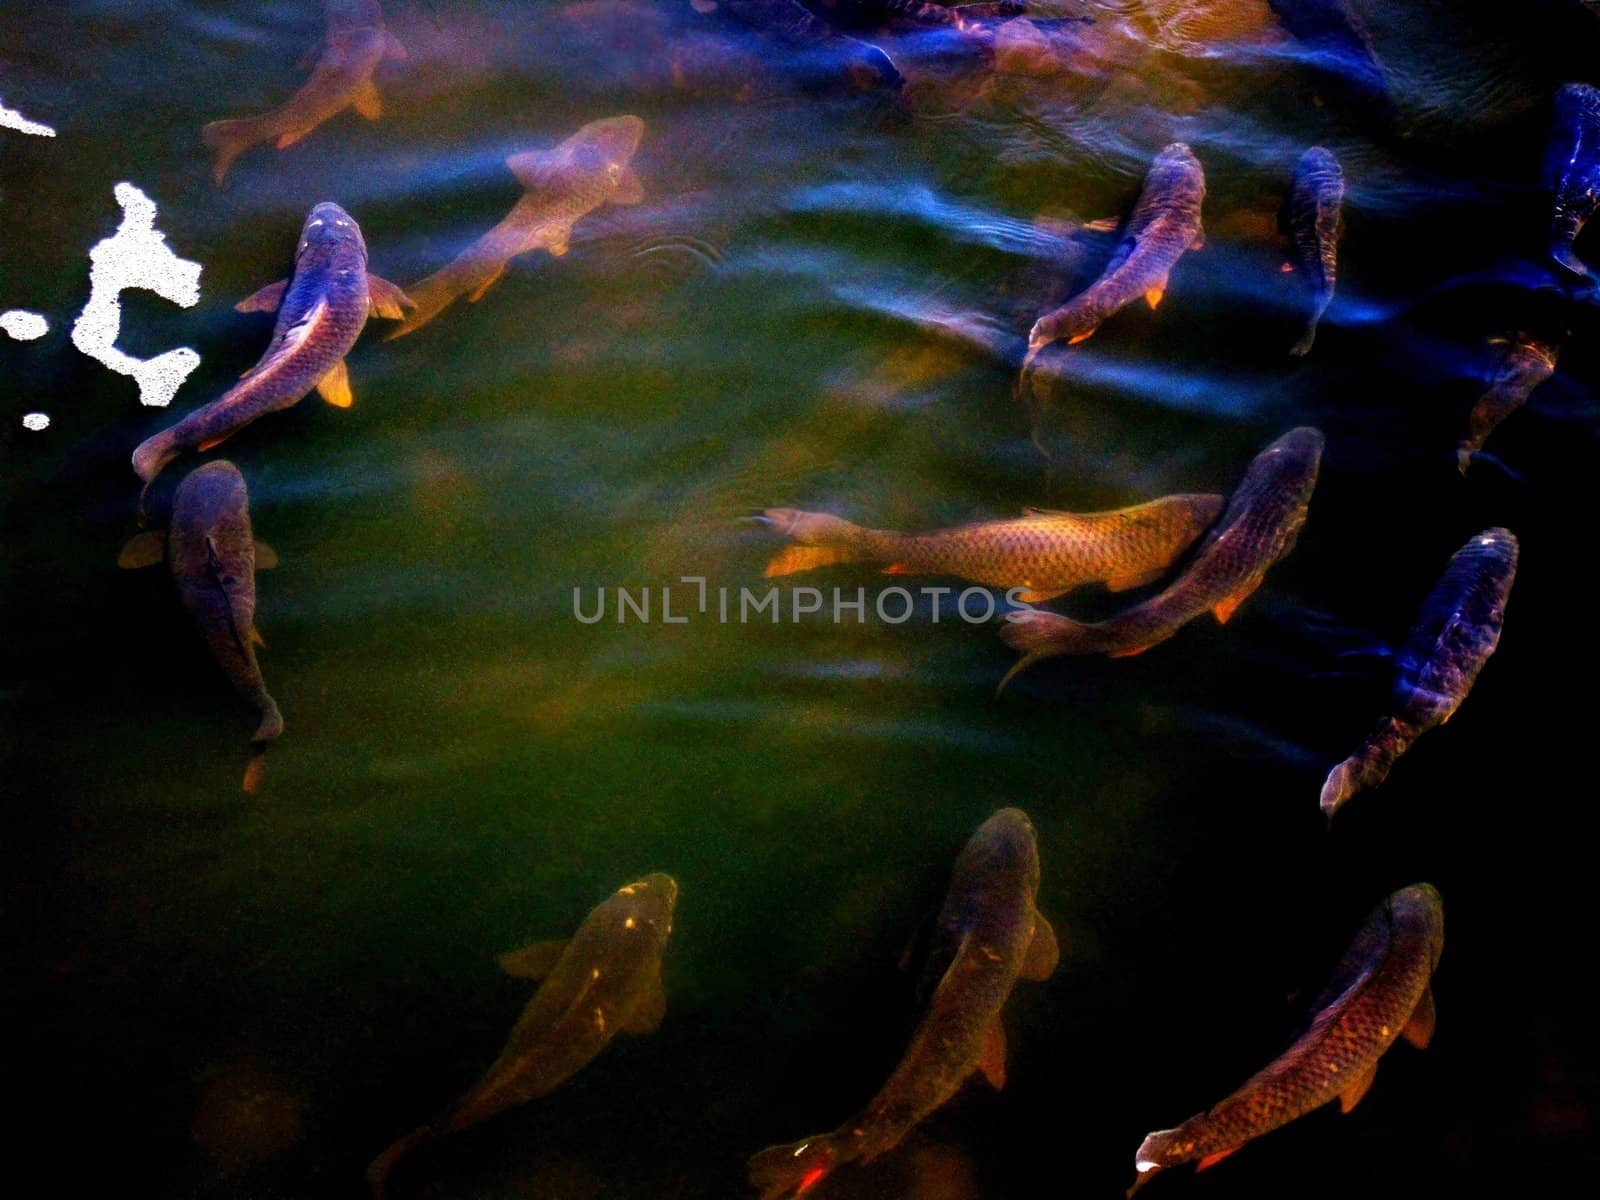 A group of Common Carp (Cyprinus carpio) swimming in the shallows of a pond.